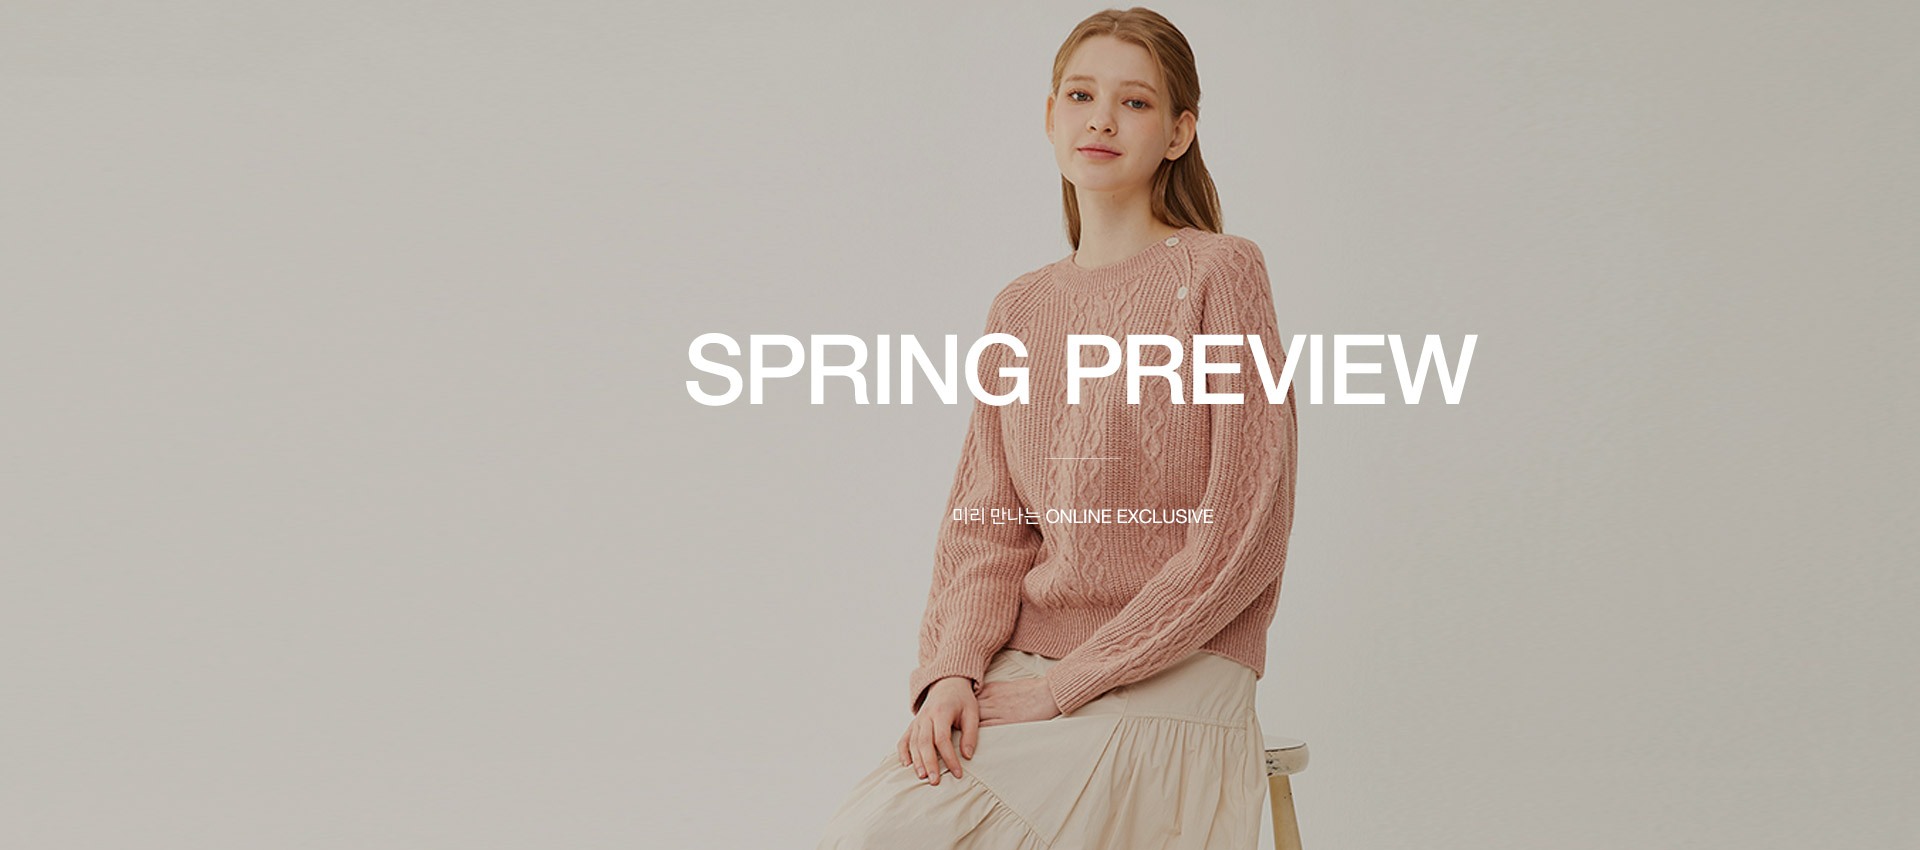 0_SPRING PREVIEW